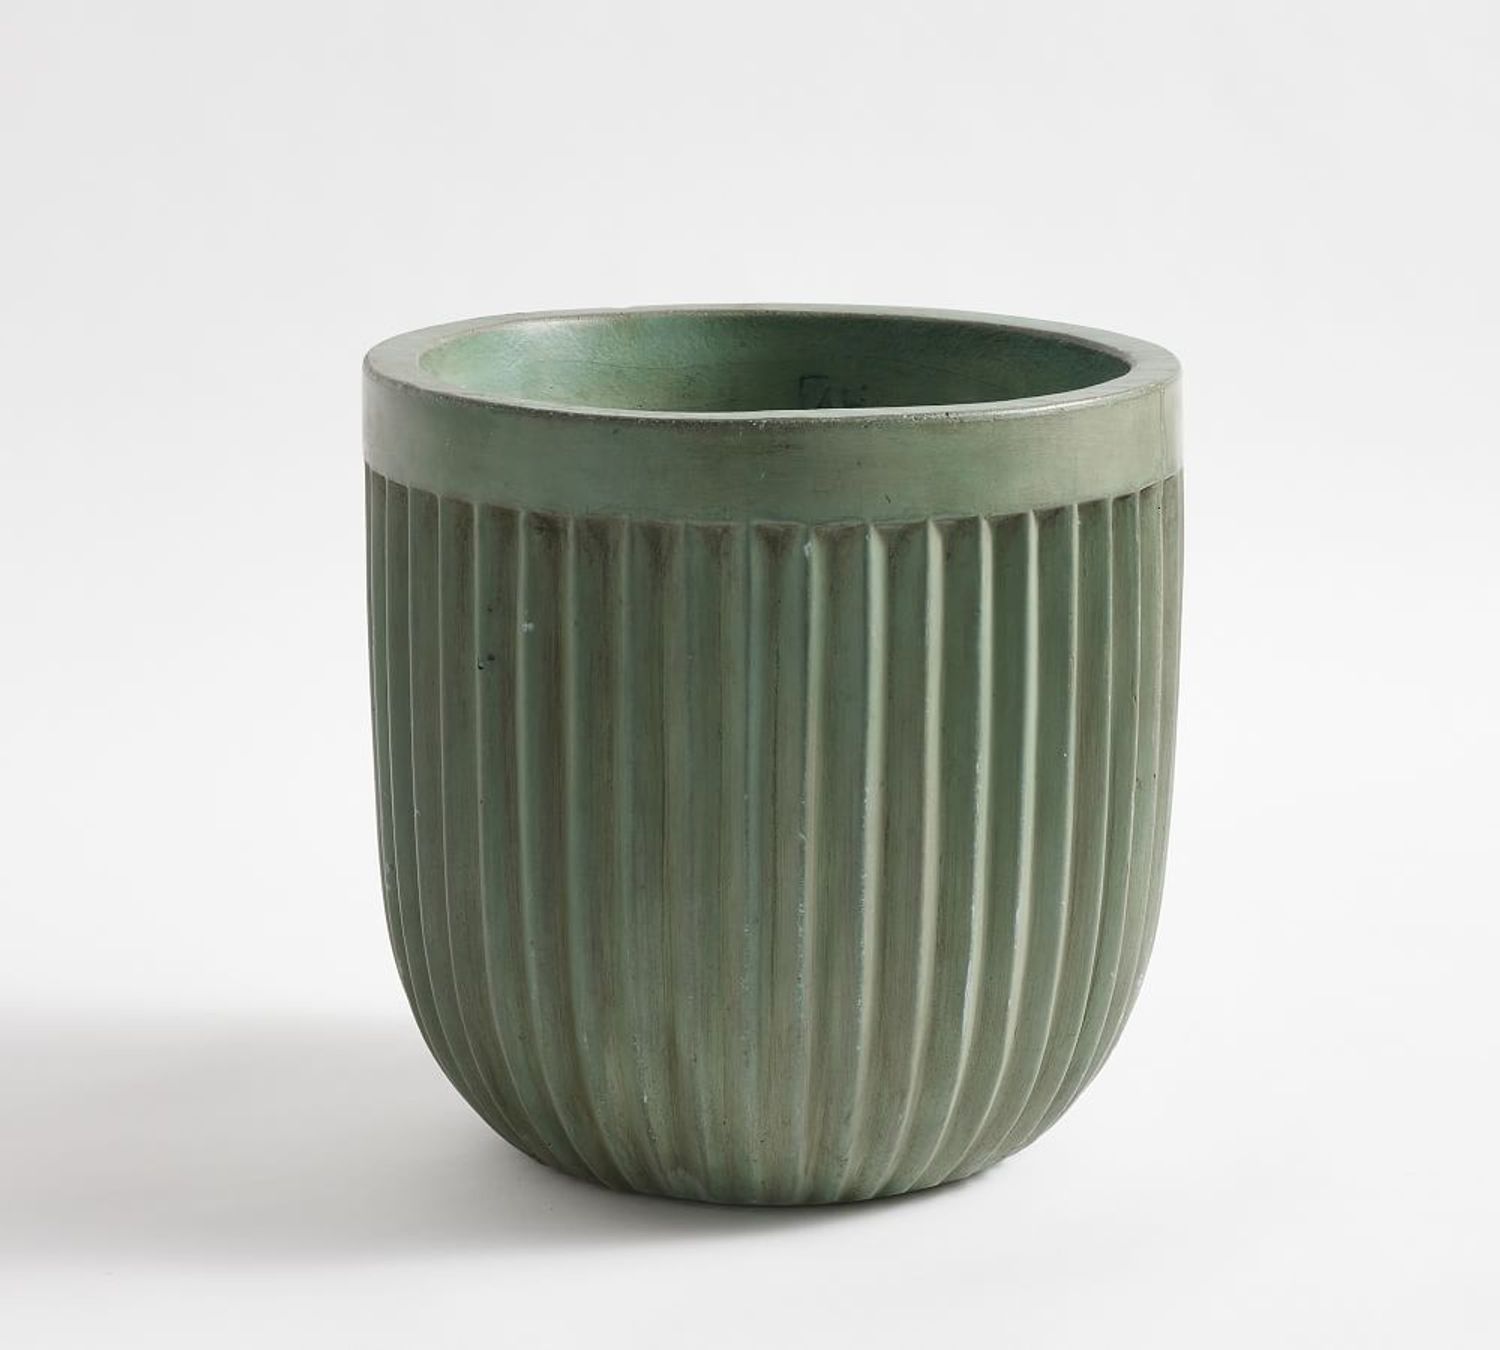 Shop Concrete Fluted Planters  from Pottery Barn on Openhaus